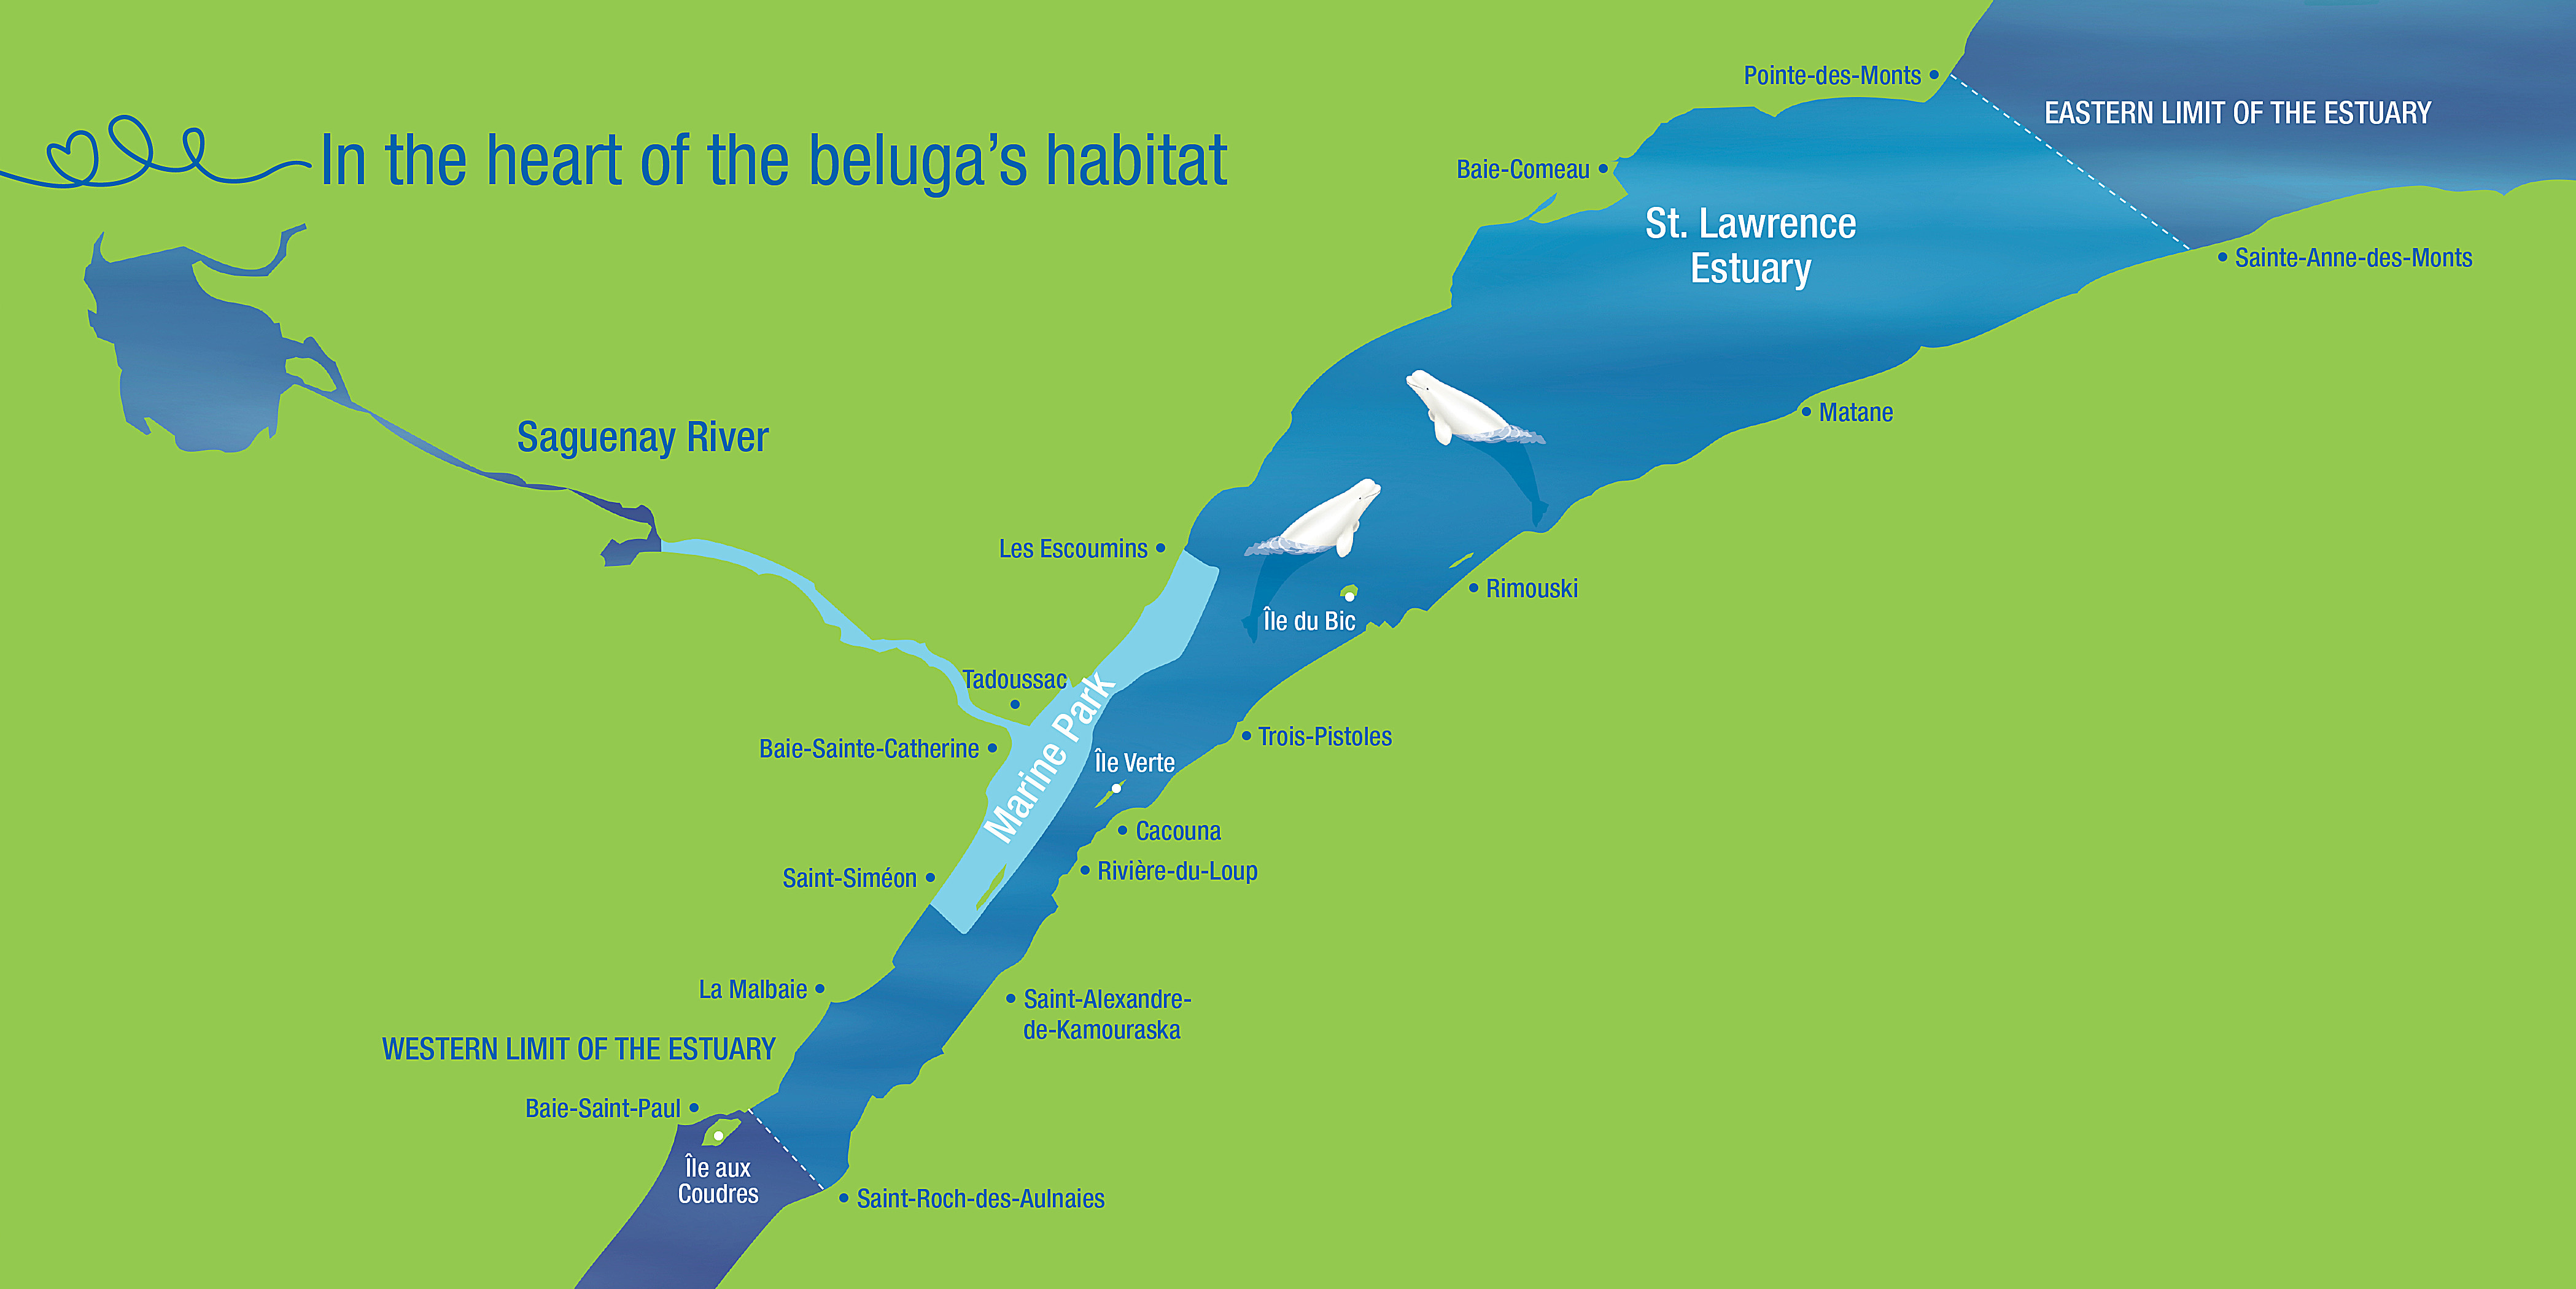 Map of the limits of the St. Lawrence Estuary. Eastern tip of Isle-aux-Coudres and Saint-Roch-des-Aulnaies upstream; Pointe-des-Monts and Sainte-Anne-des-Monts downstream.